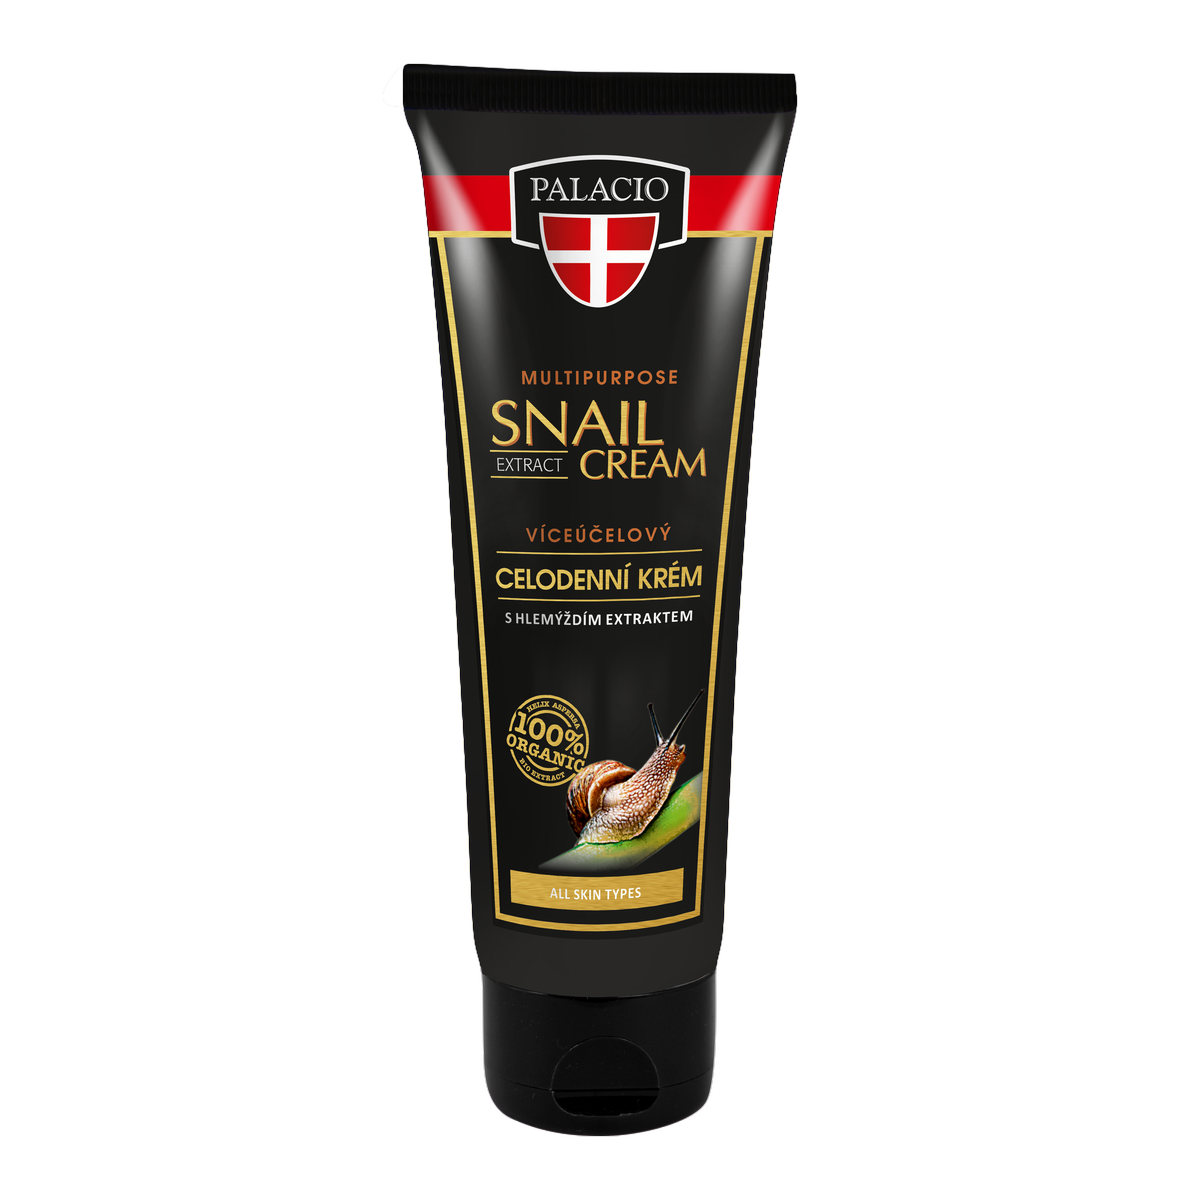 SNAIL EXTRACT Multipurpouse Cream 125ml P1305 ENG WEB 105